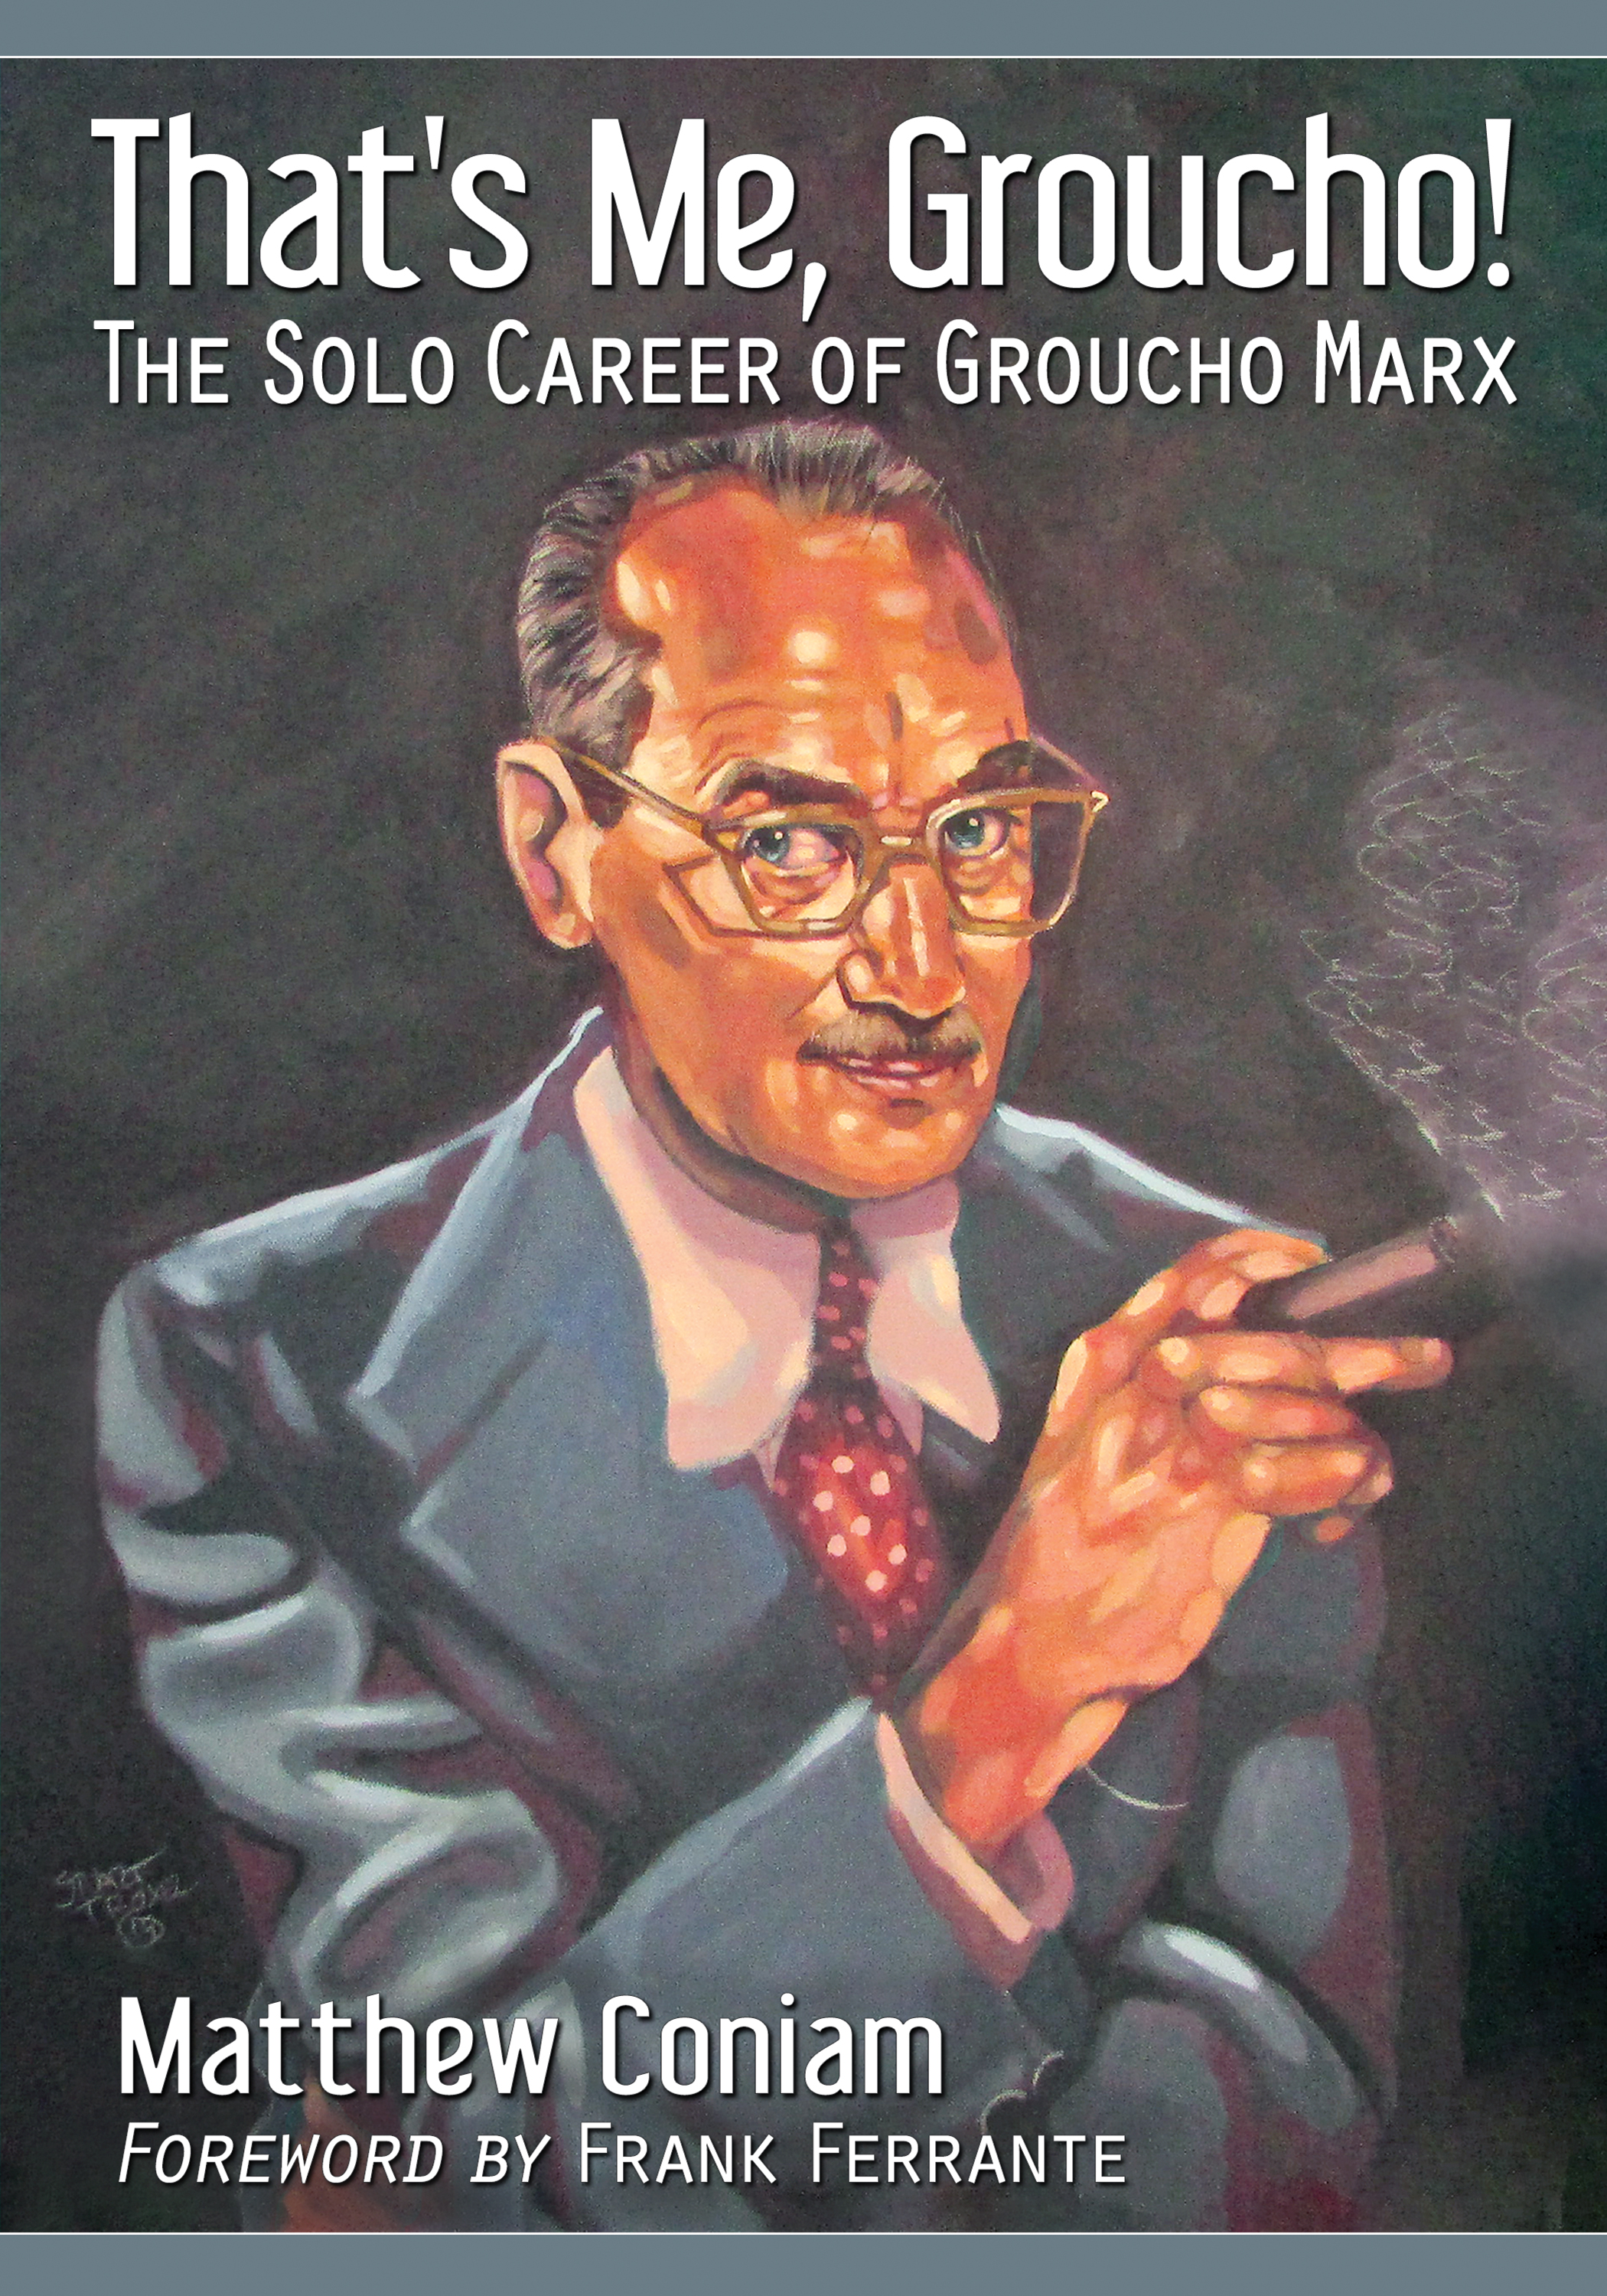 Thats Me Groucho The Solo Career of Groucho Marx MATTHEW CONIAM Foreword - photo 1